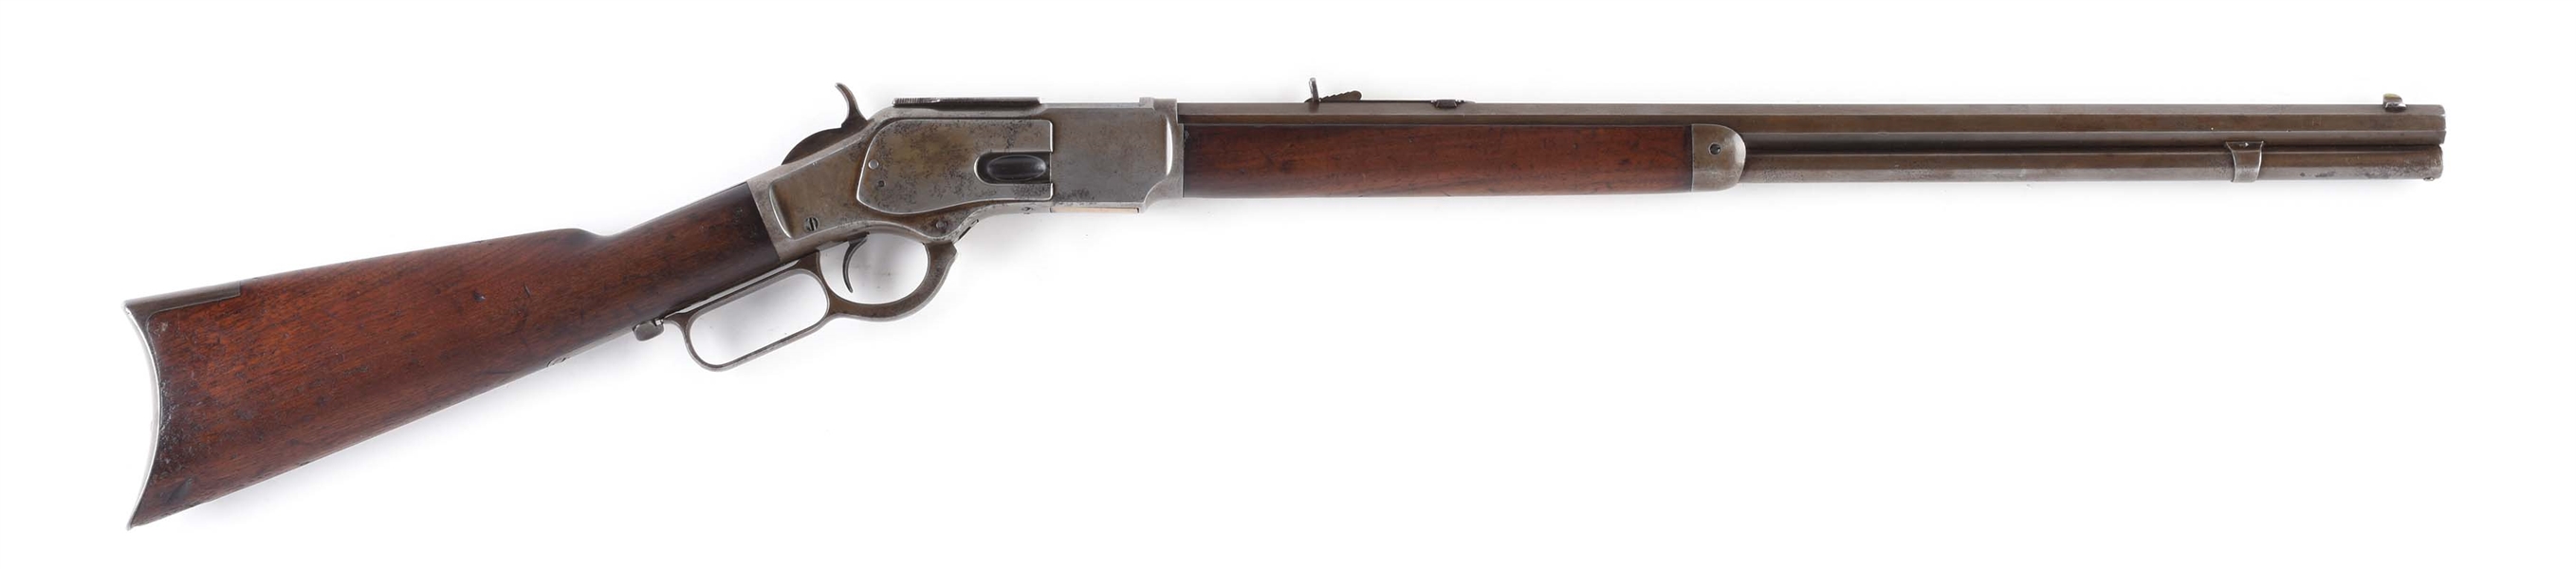 (A) WINCHESTER 3RD MODEL 1873 OCTAGON BARREL LEVER ACTION RIFLE (1889).